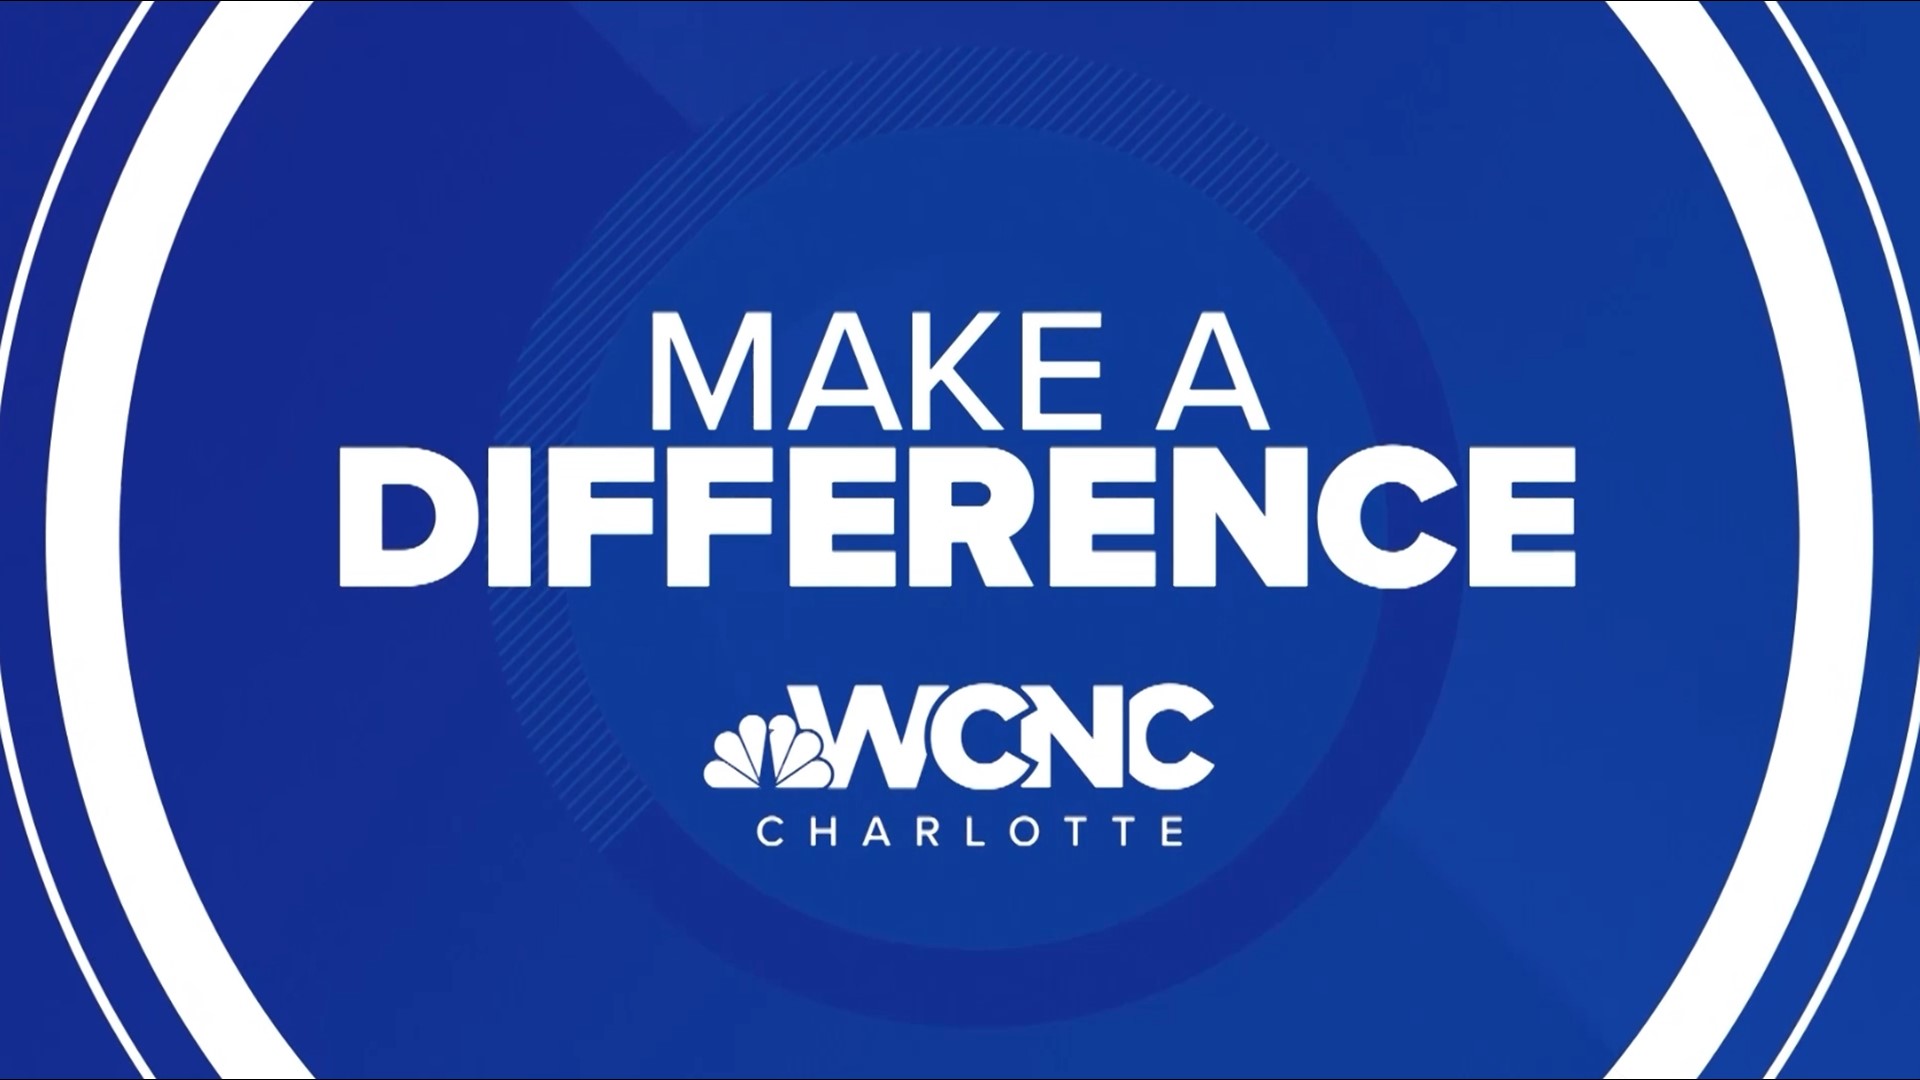 With your help, WCNC Charlotte is making a difference in our community.